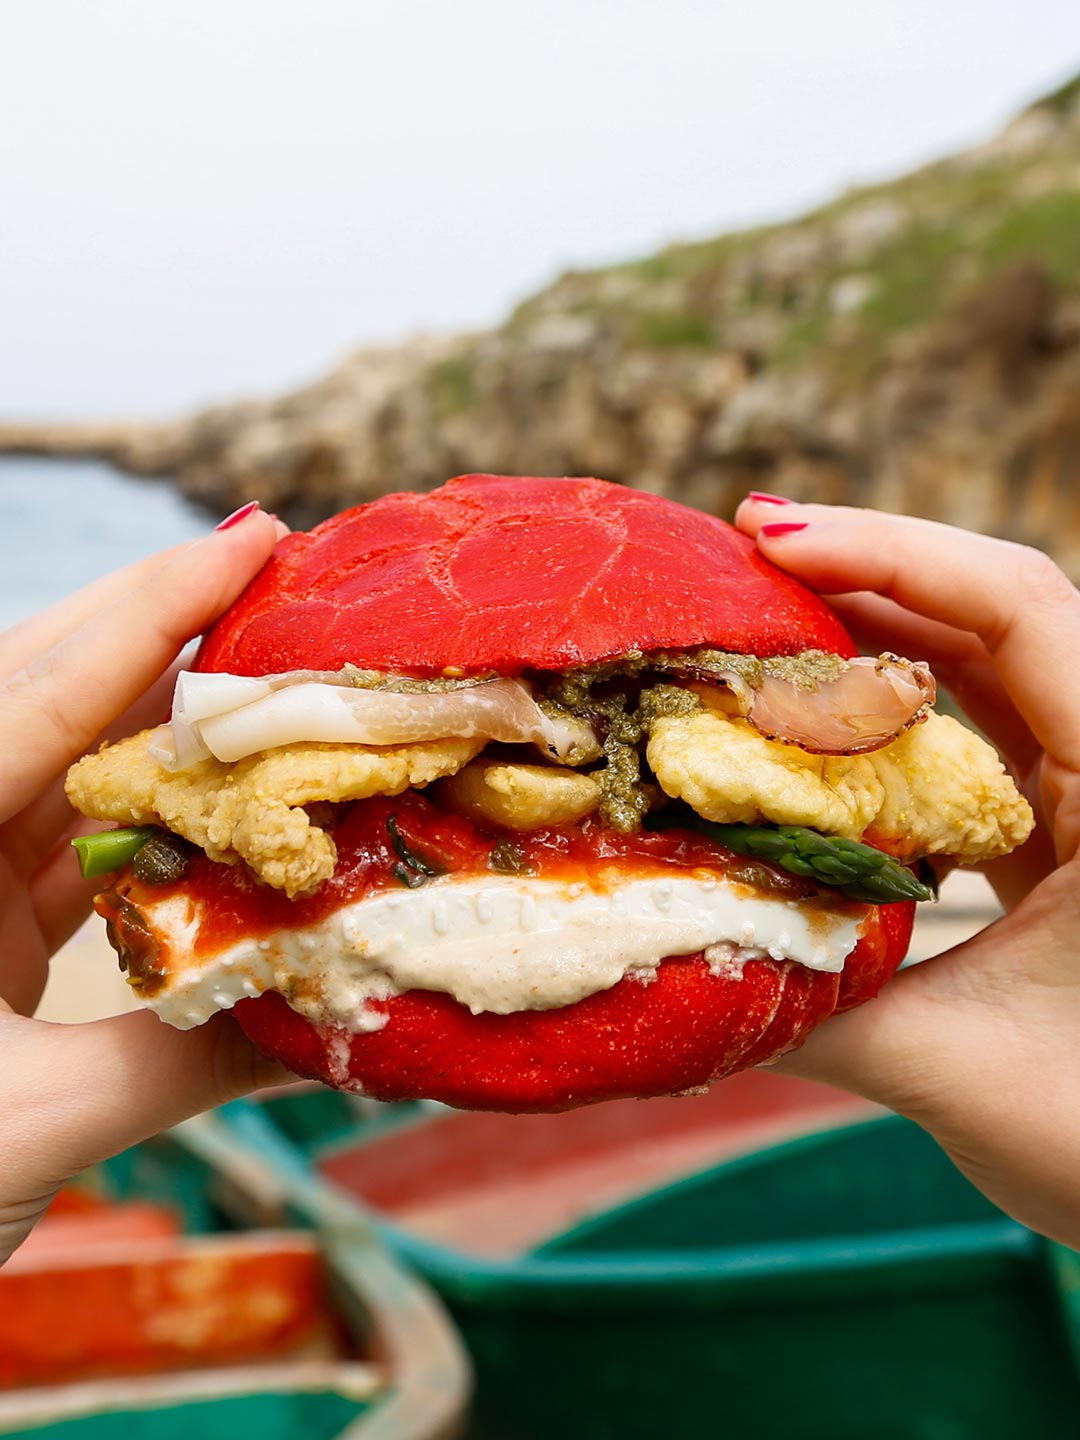 Special edition fish sandwich by Pescaria